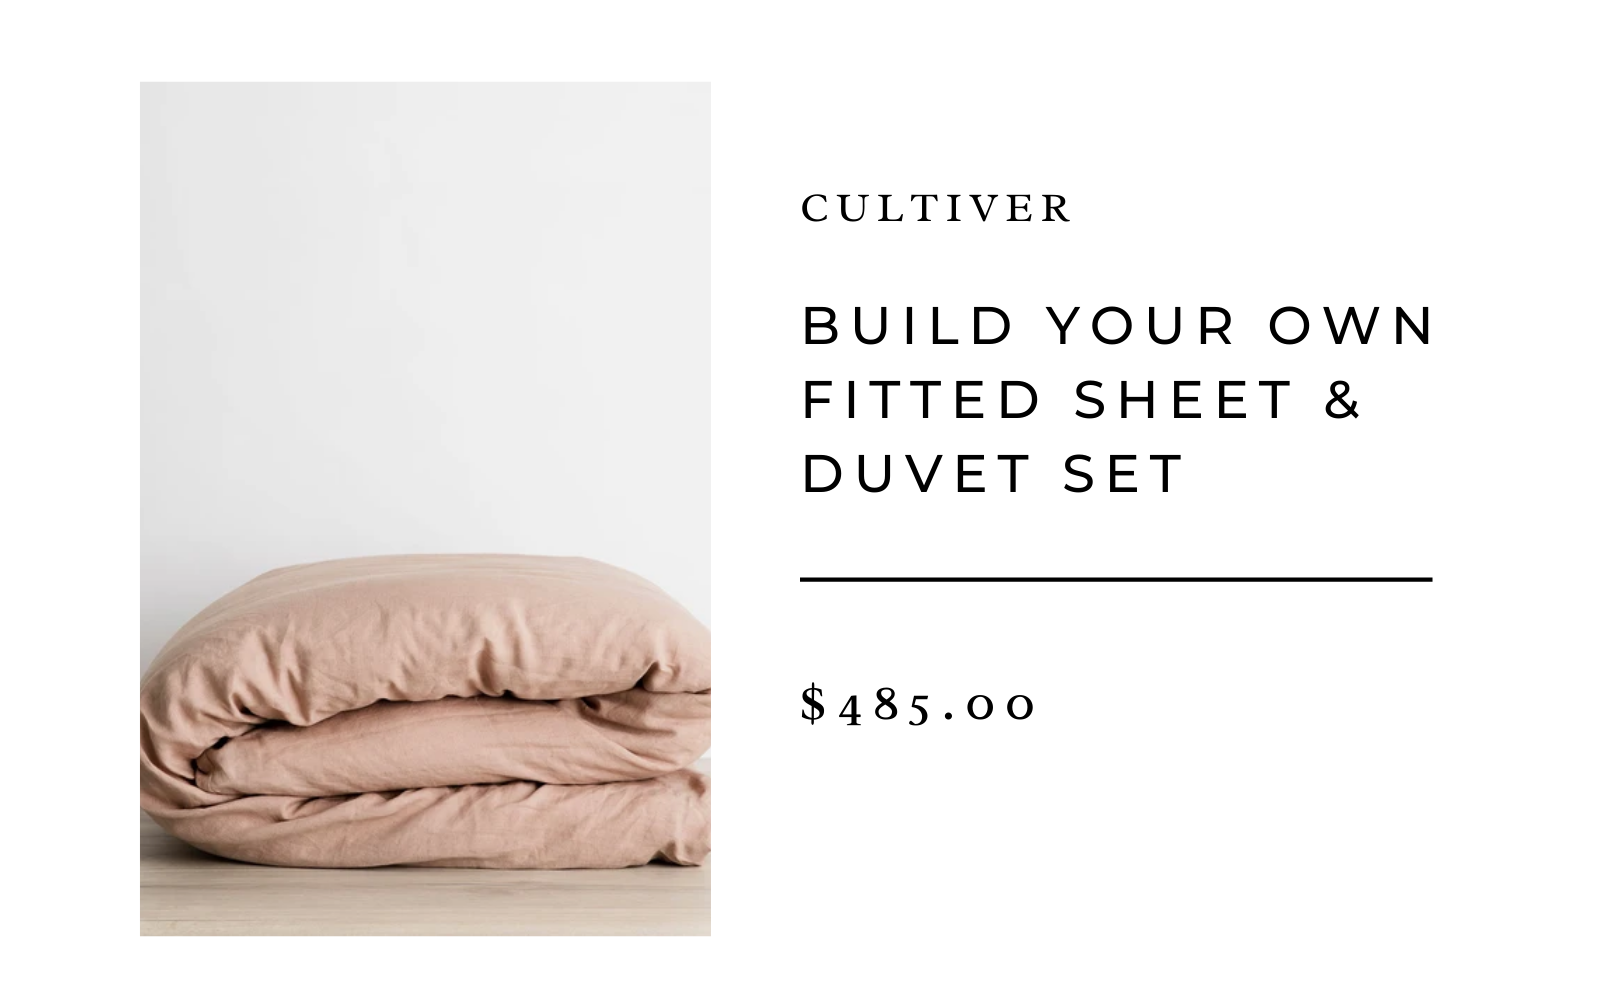 Cultiver Build Your Own Fitted Sheet & Duvet Set